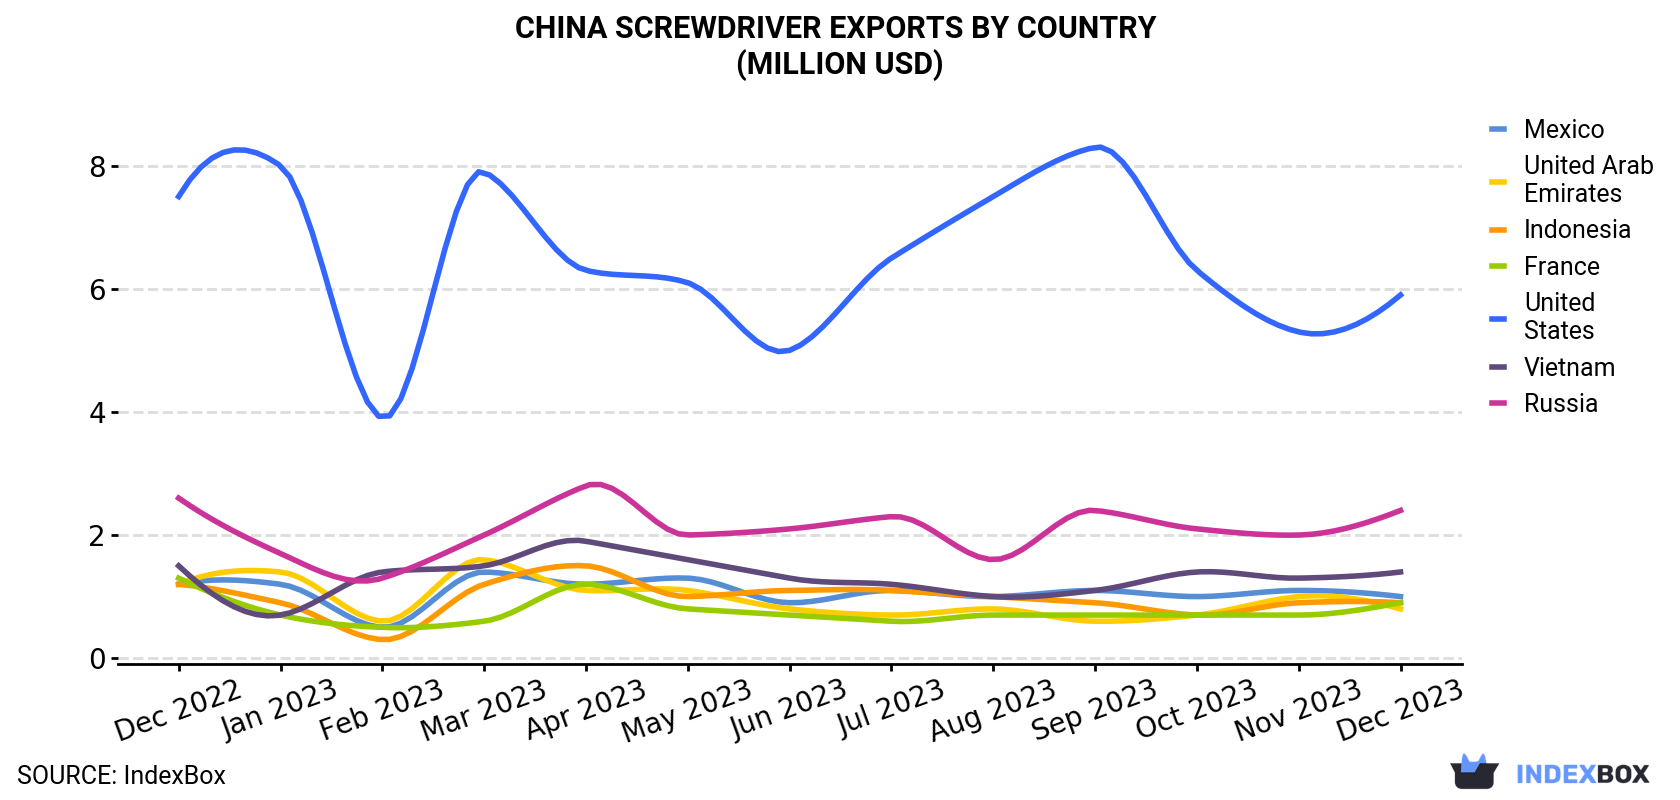 China Screwdriver Exports By Country (Million USD)